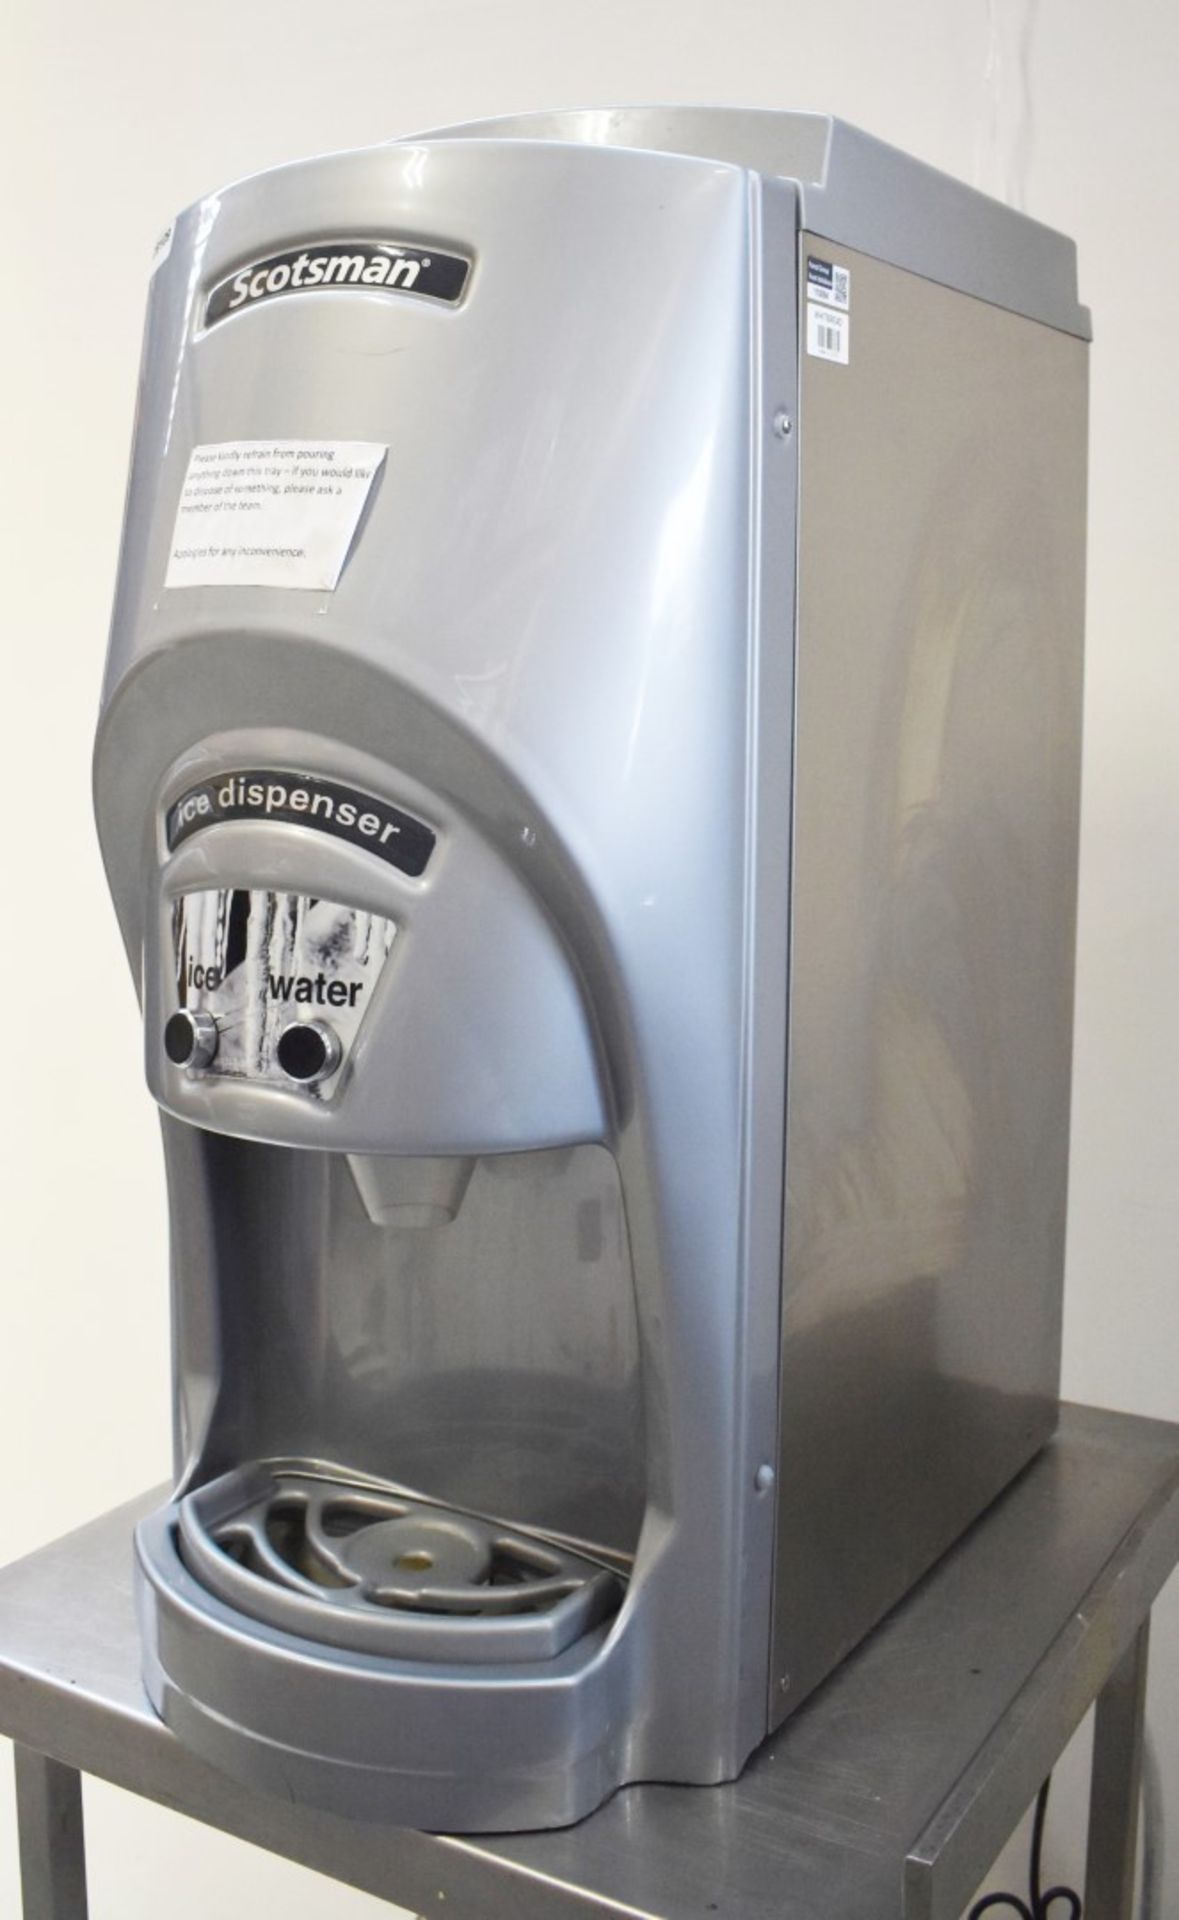 1 x Scotsman Countertop Water and Ice Dispenser - 230v - Model  TCL180-9 - Ref CB109 - CL232 - H86 x